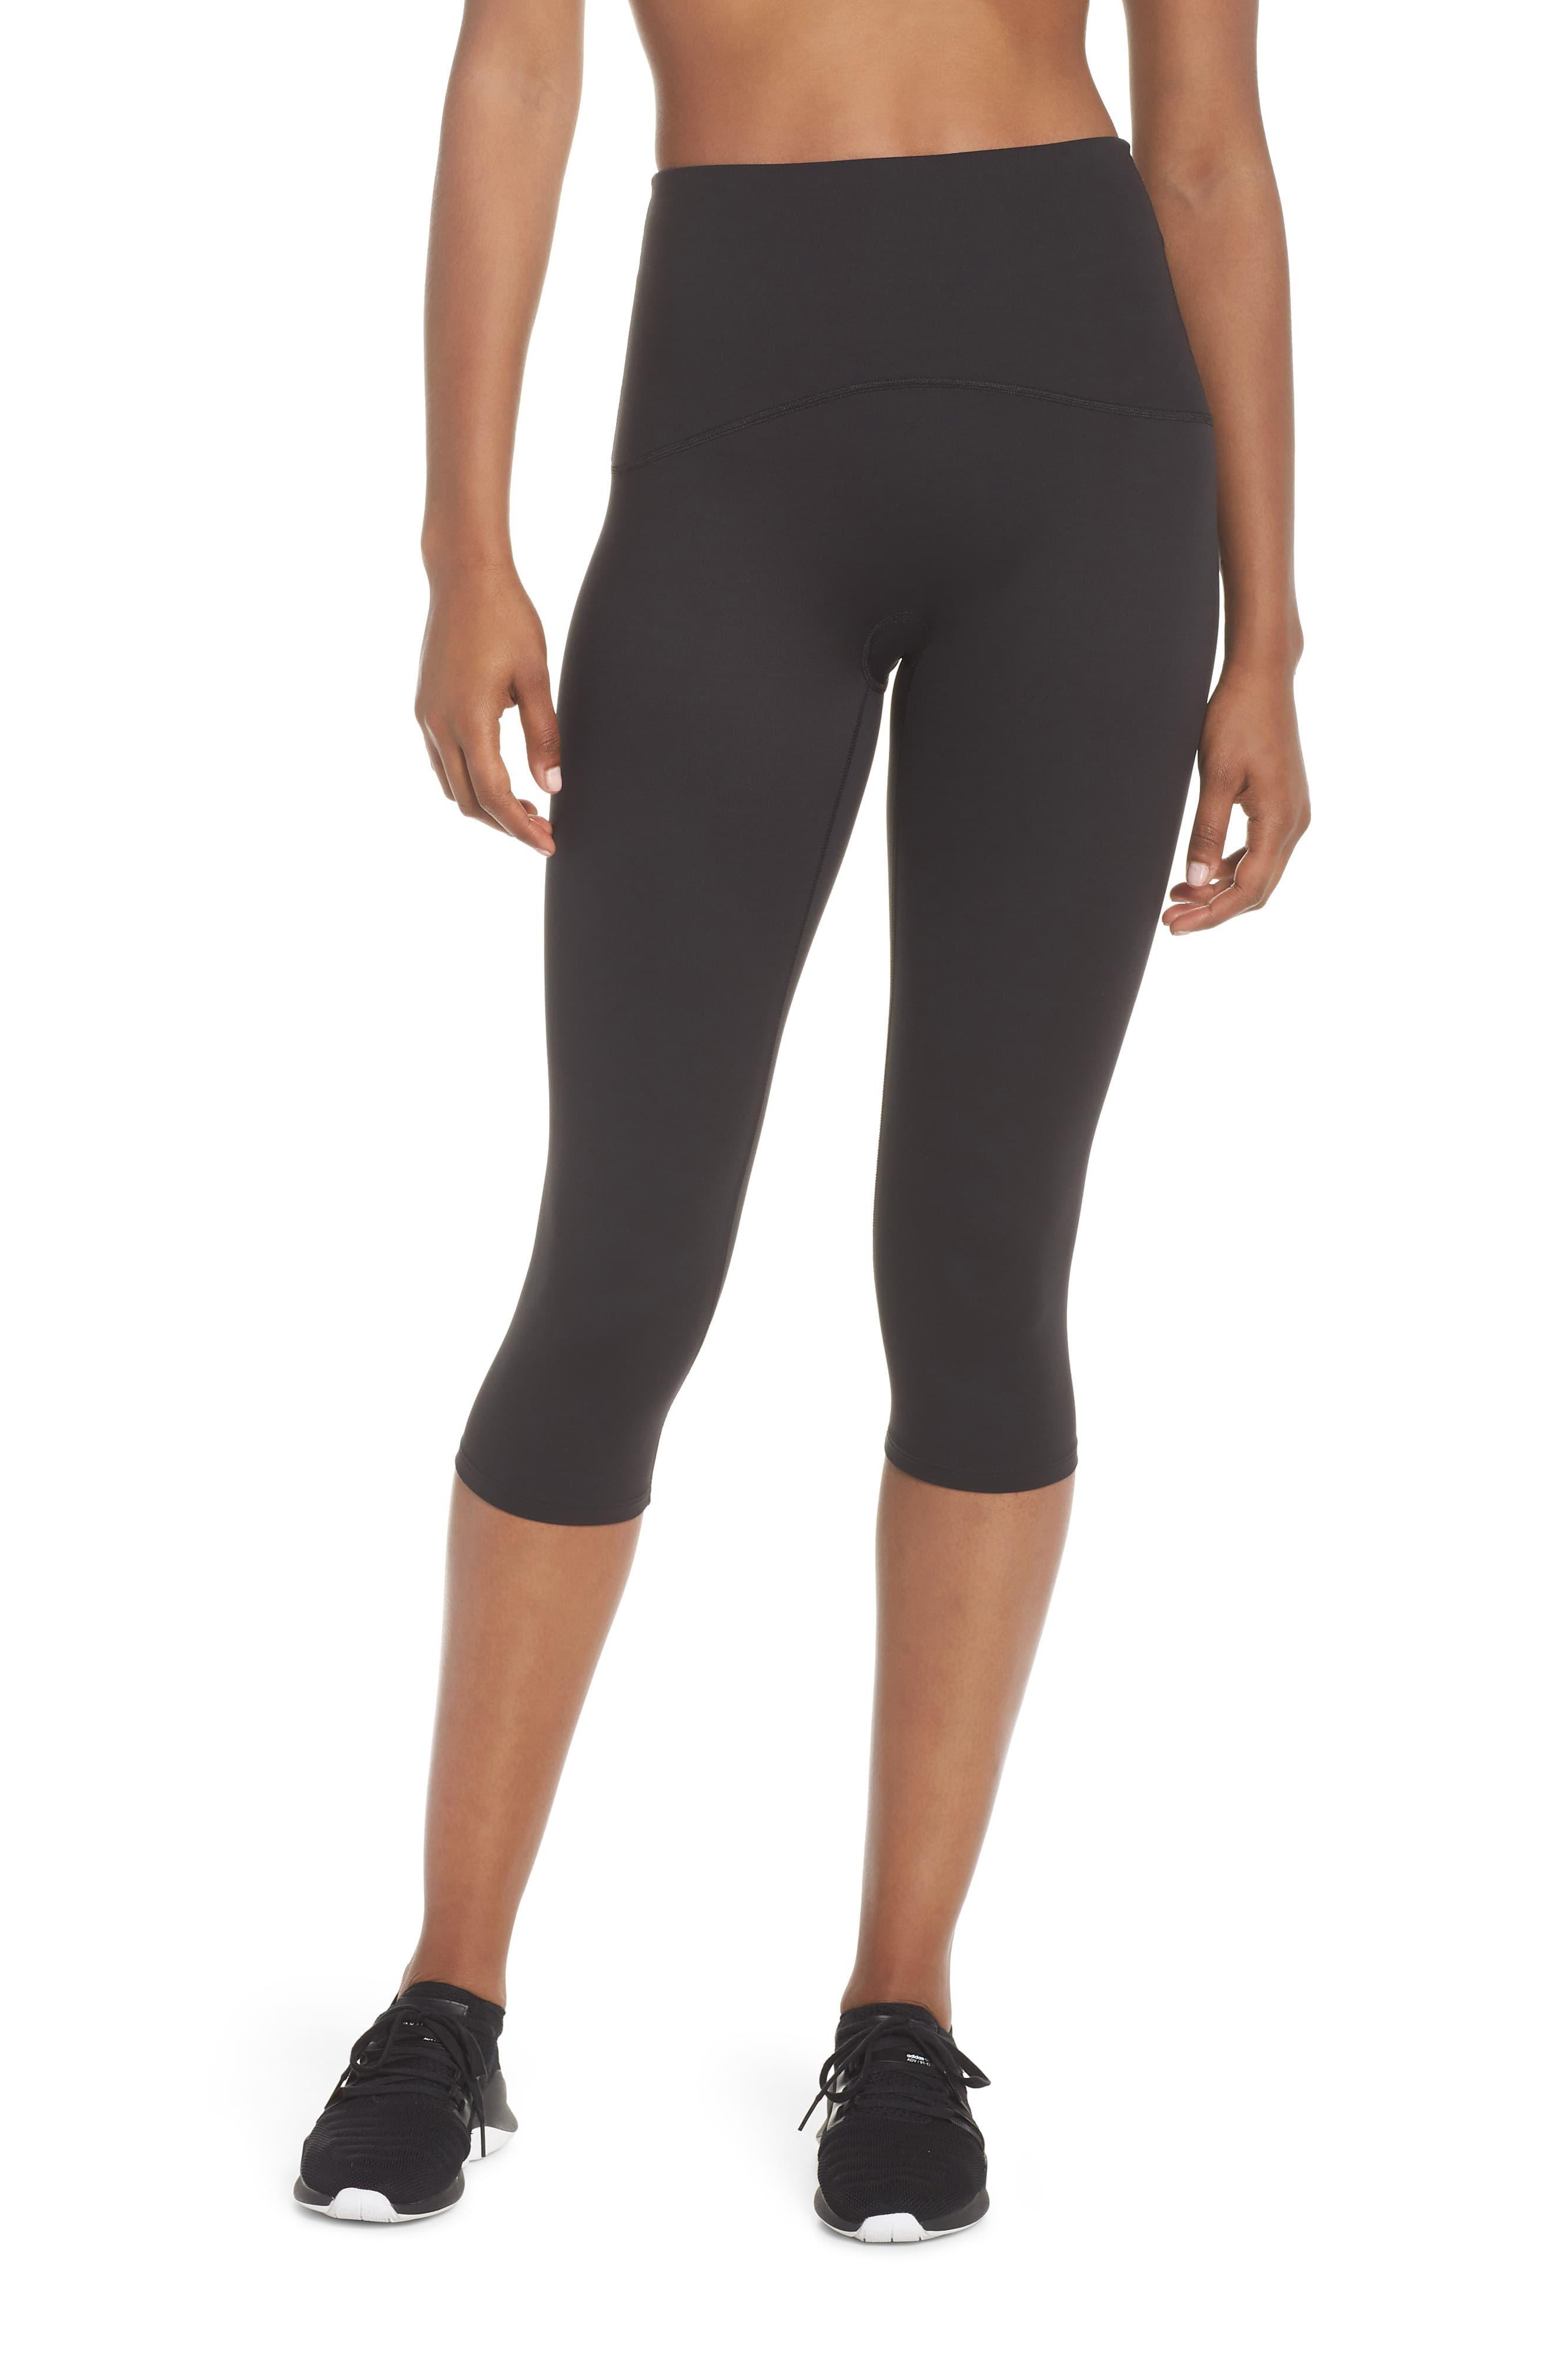 Top more than 115 spanx active cropped leggings latest